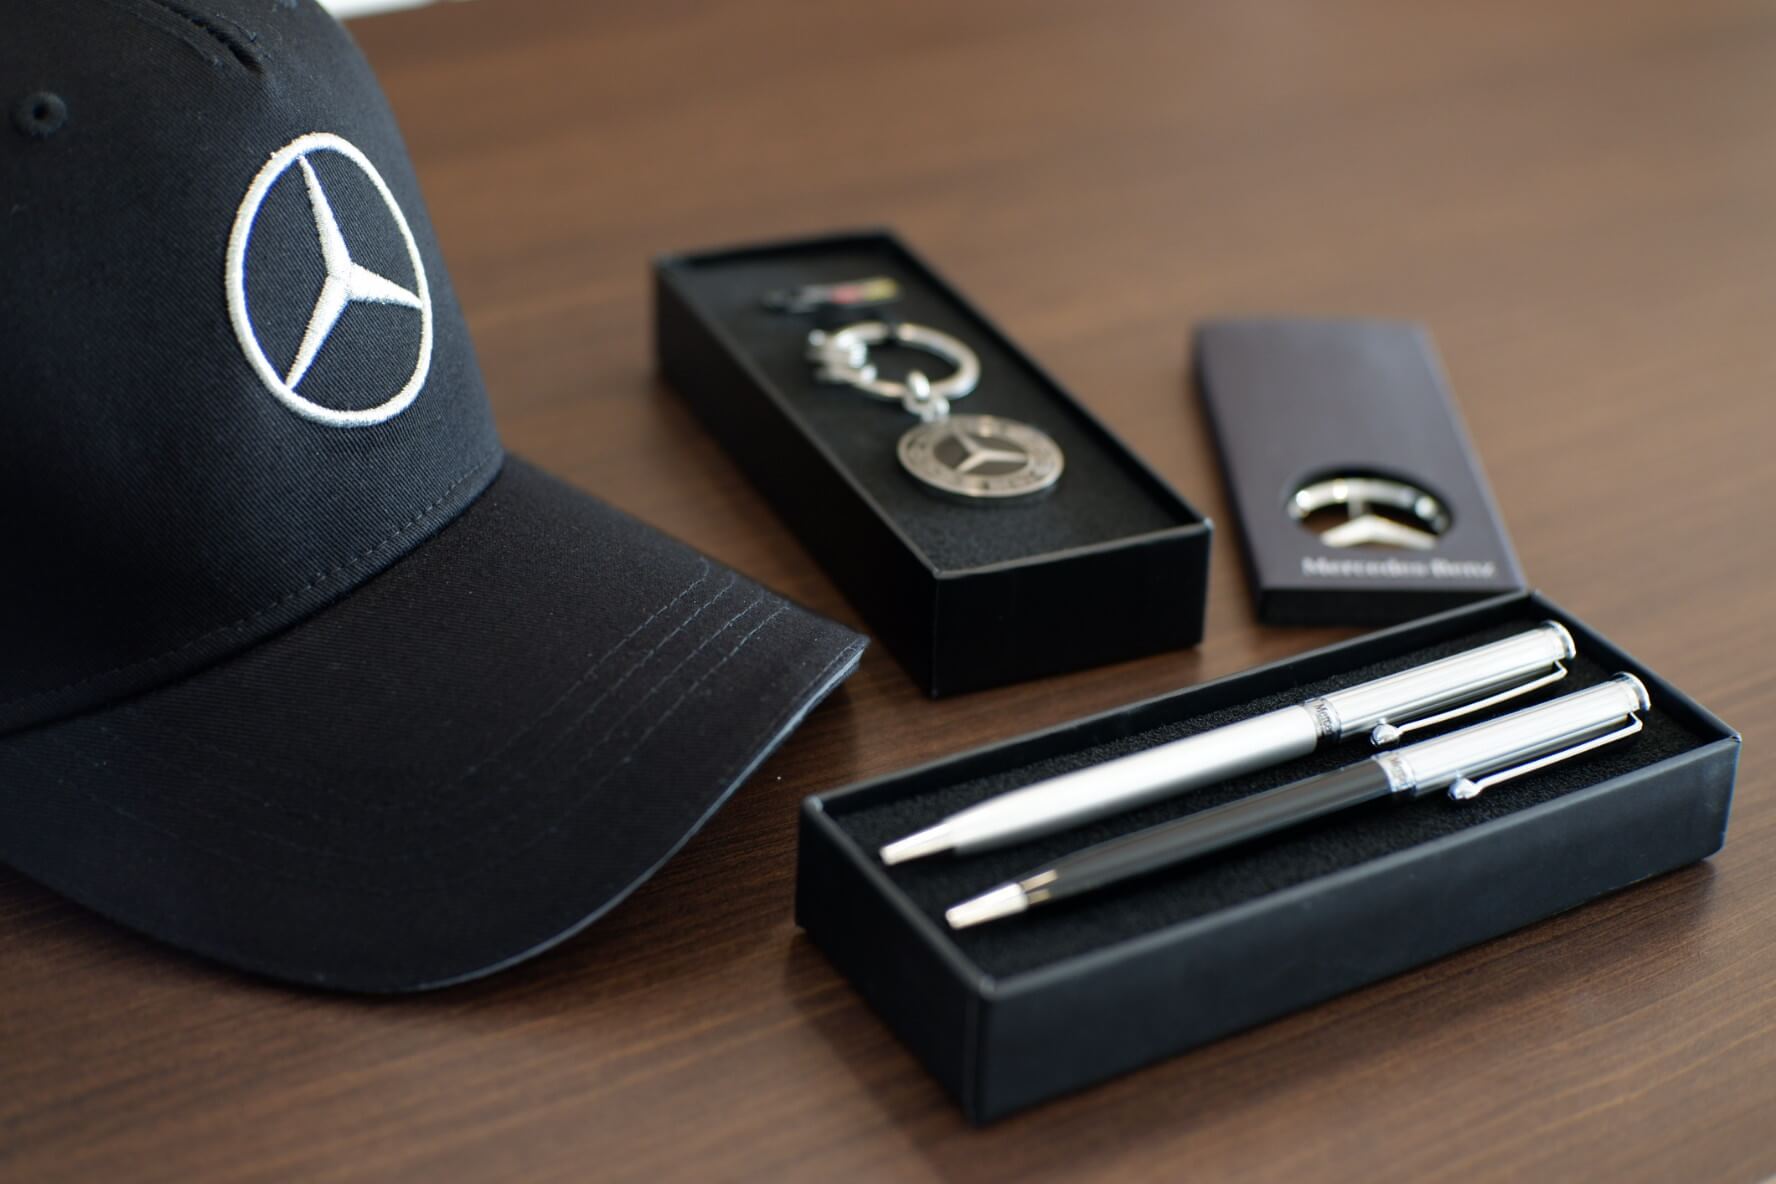 Women who avail of the offerings will be entitled to a choice of exclusive Mercedes-Benz merchandise and premium vouchers from tie-up partners.